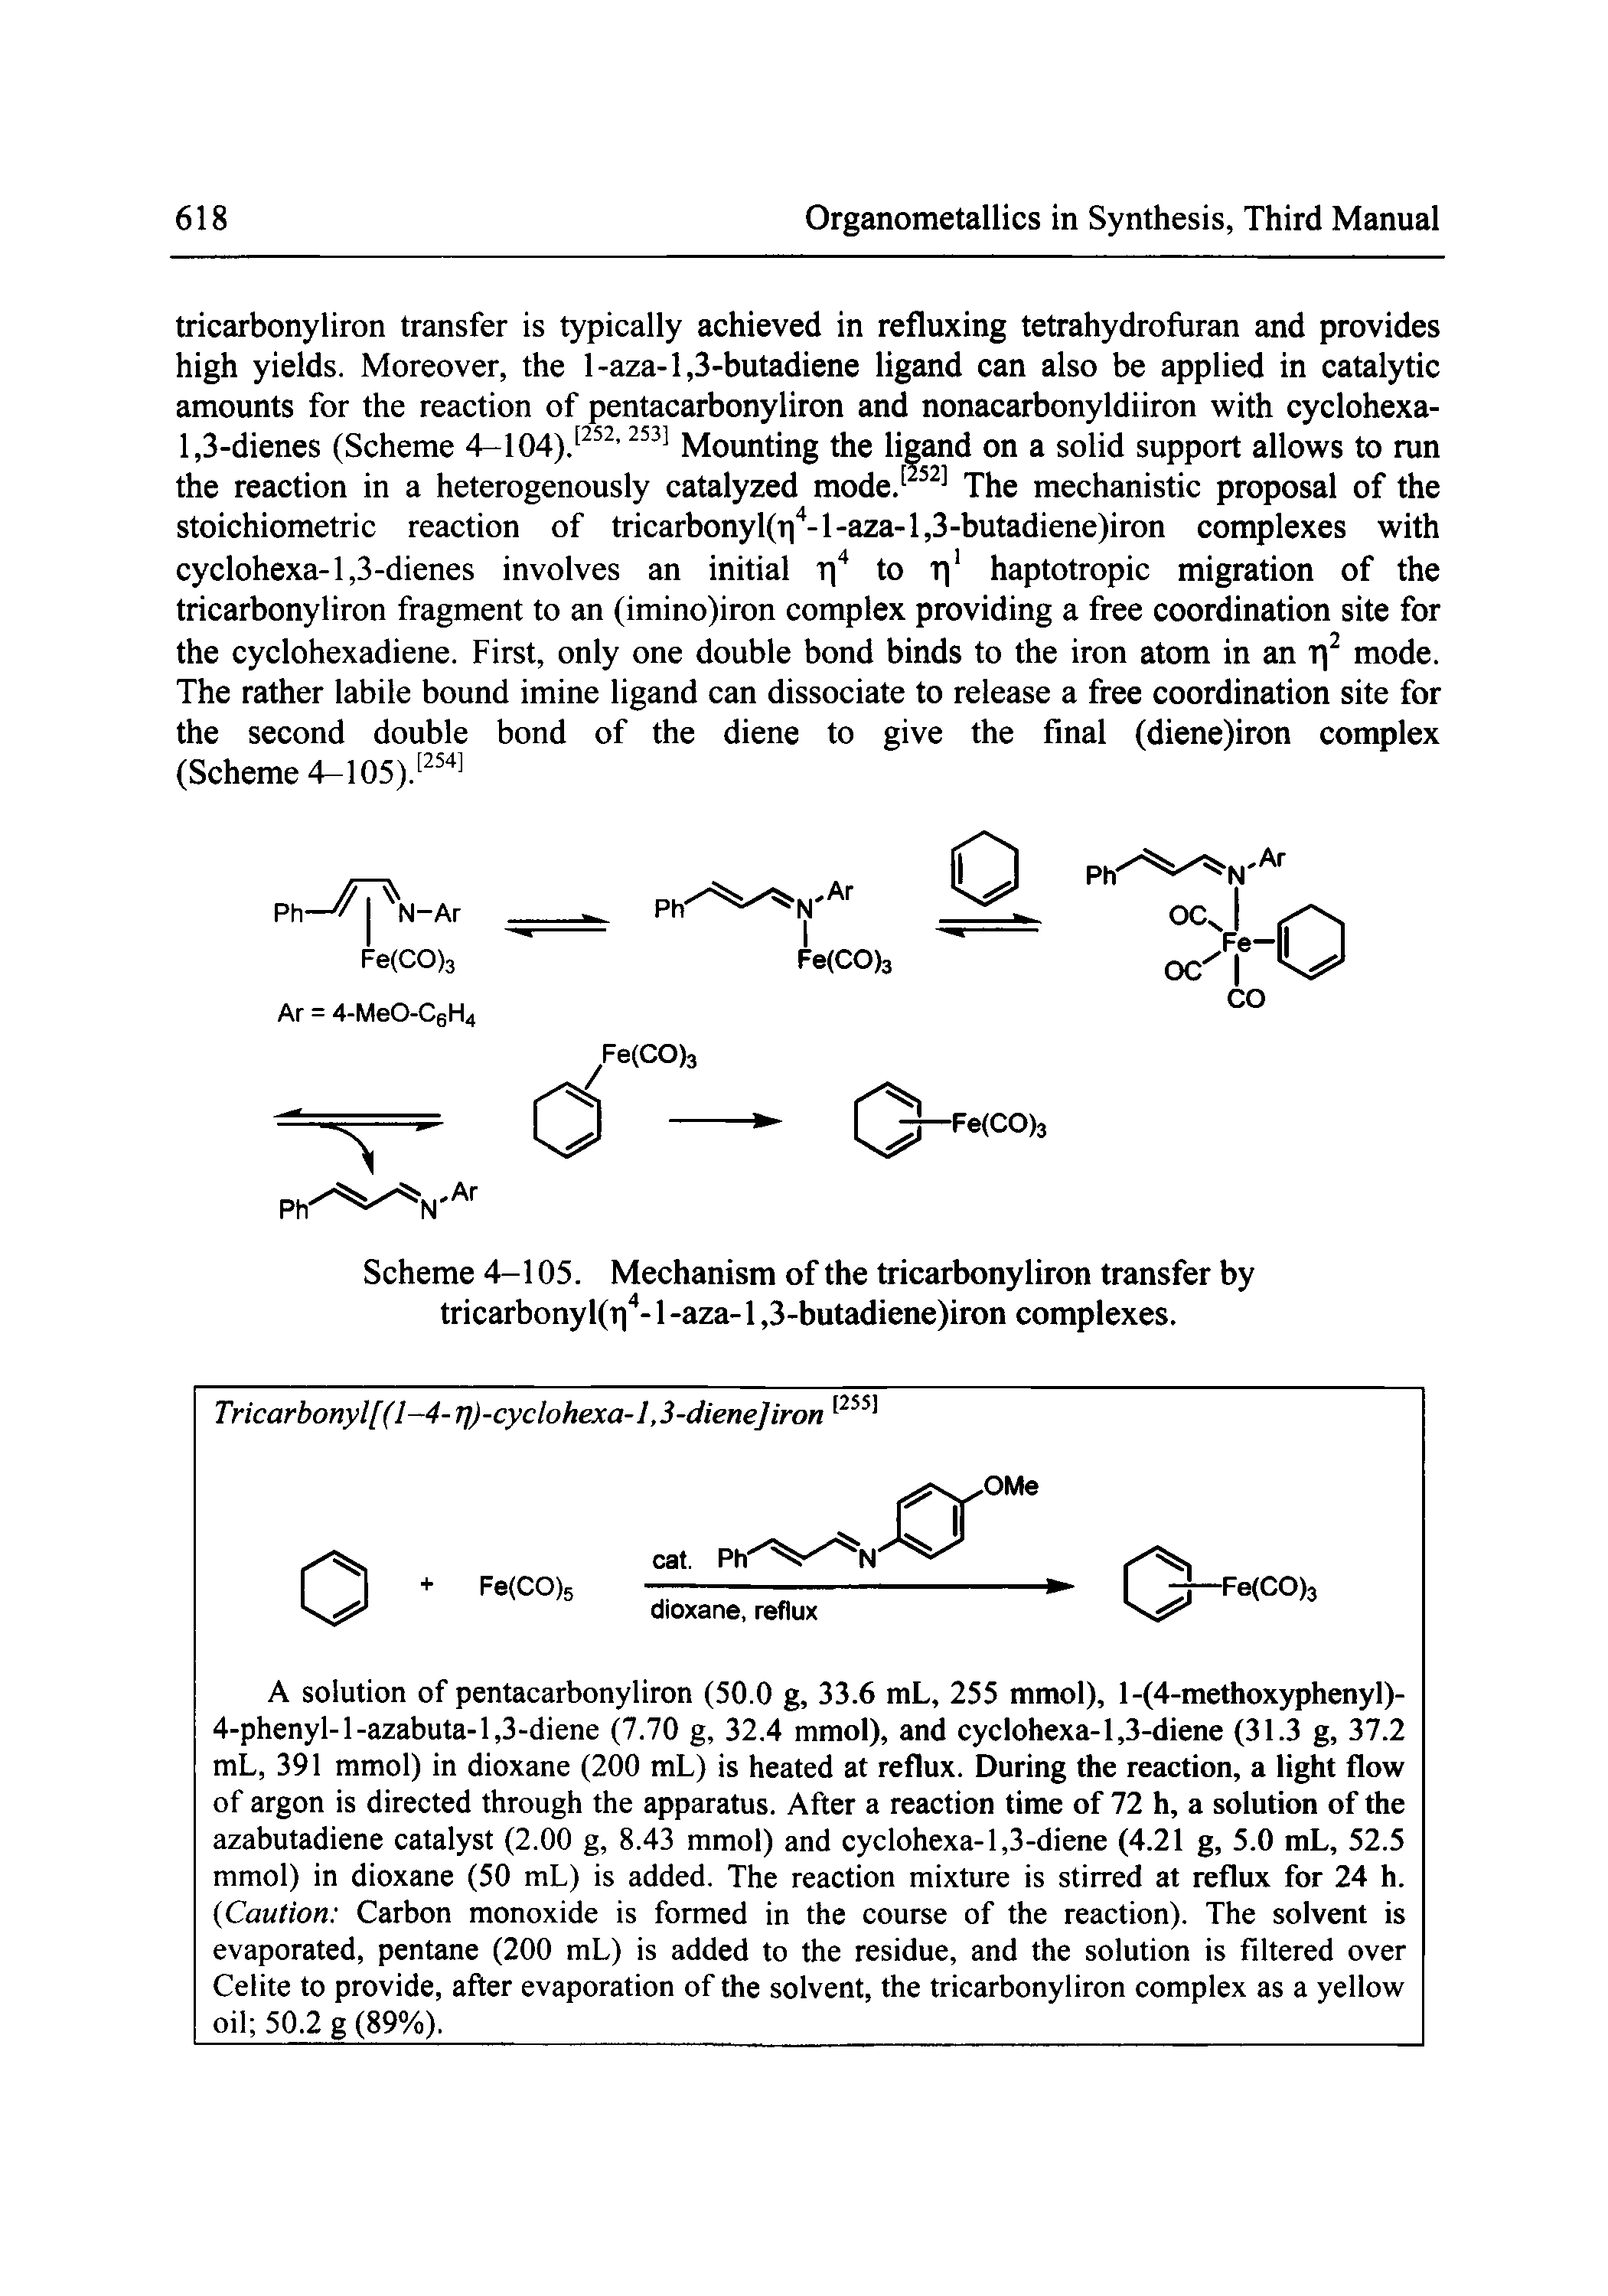 Scheme 4-105. Mechanism of the tricarbonyliron transfer by tricarbonyl(T -l-aza-l, 3-butadiene)iron complexes.